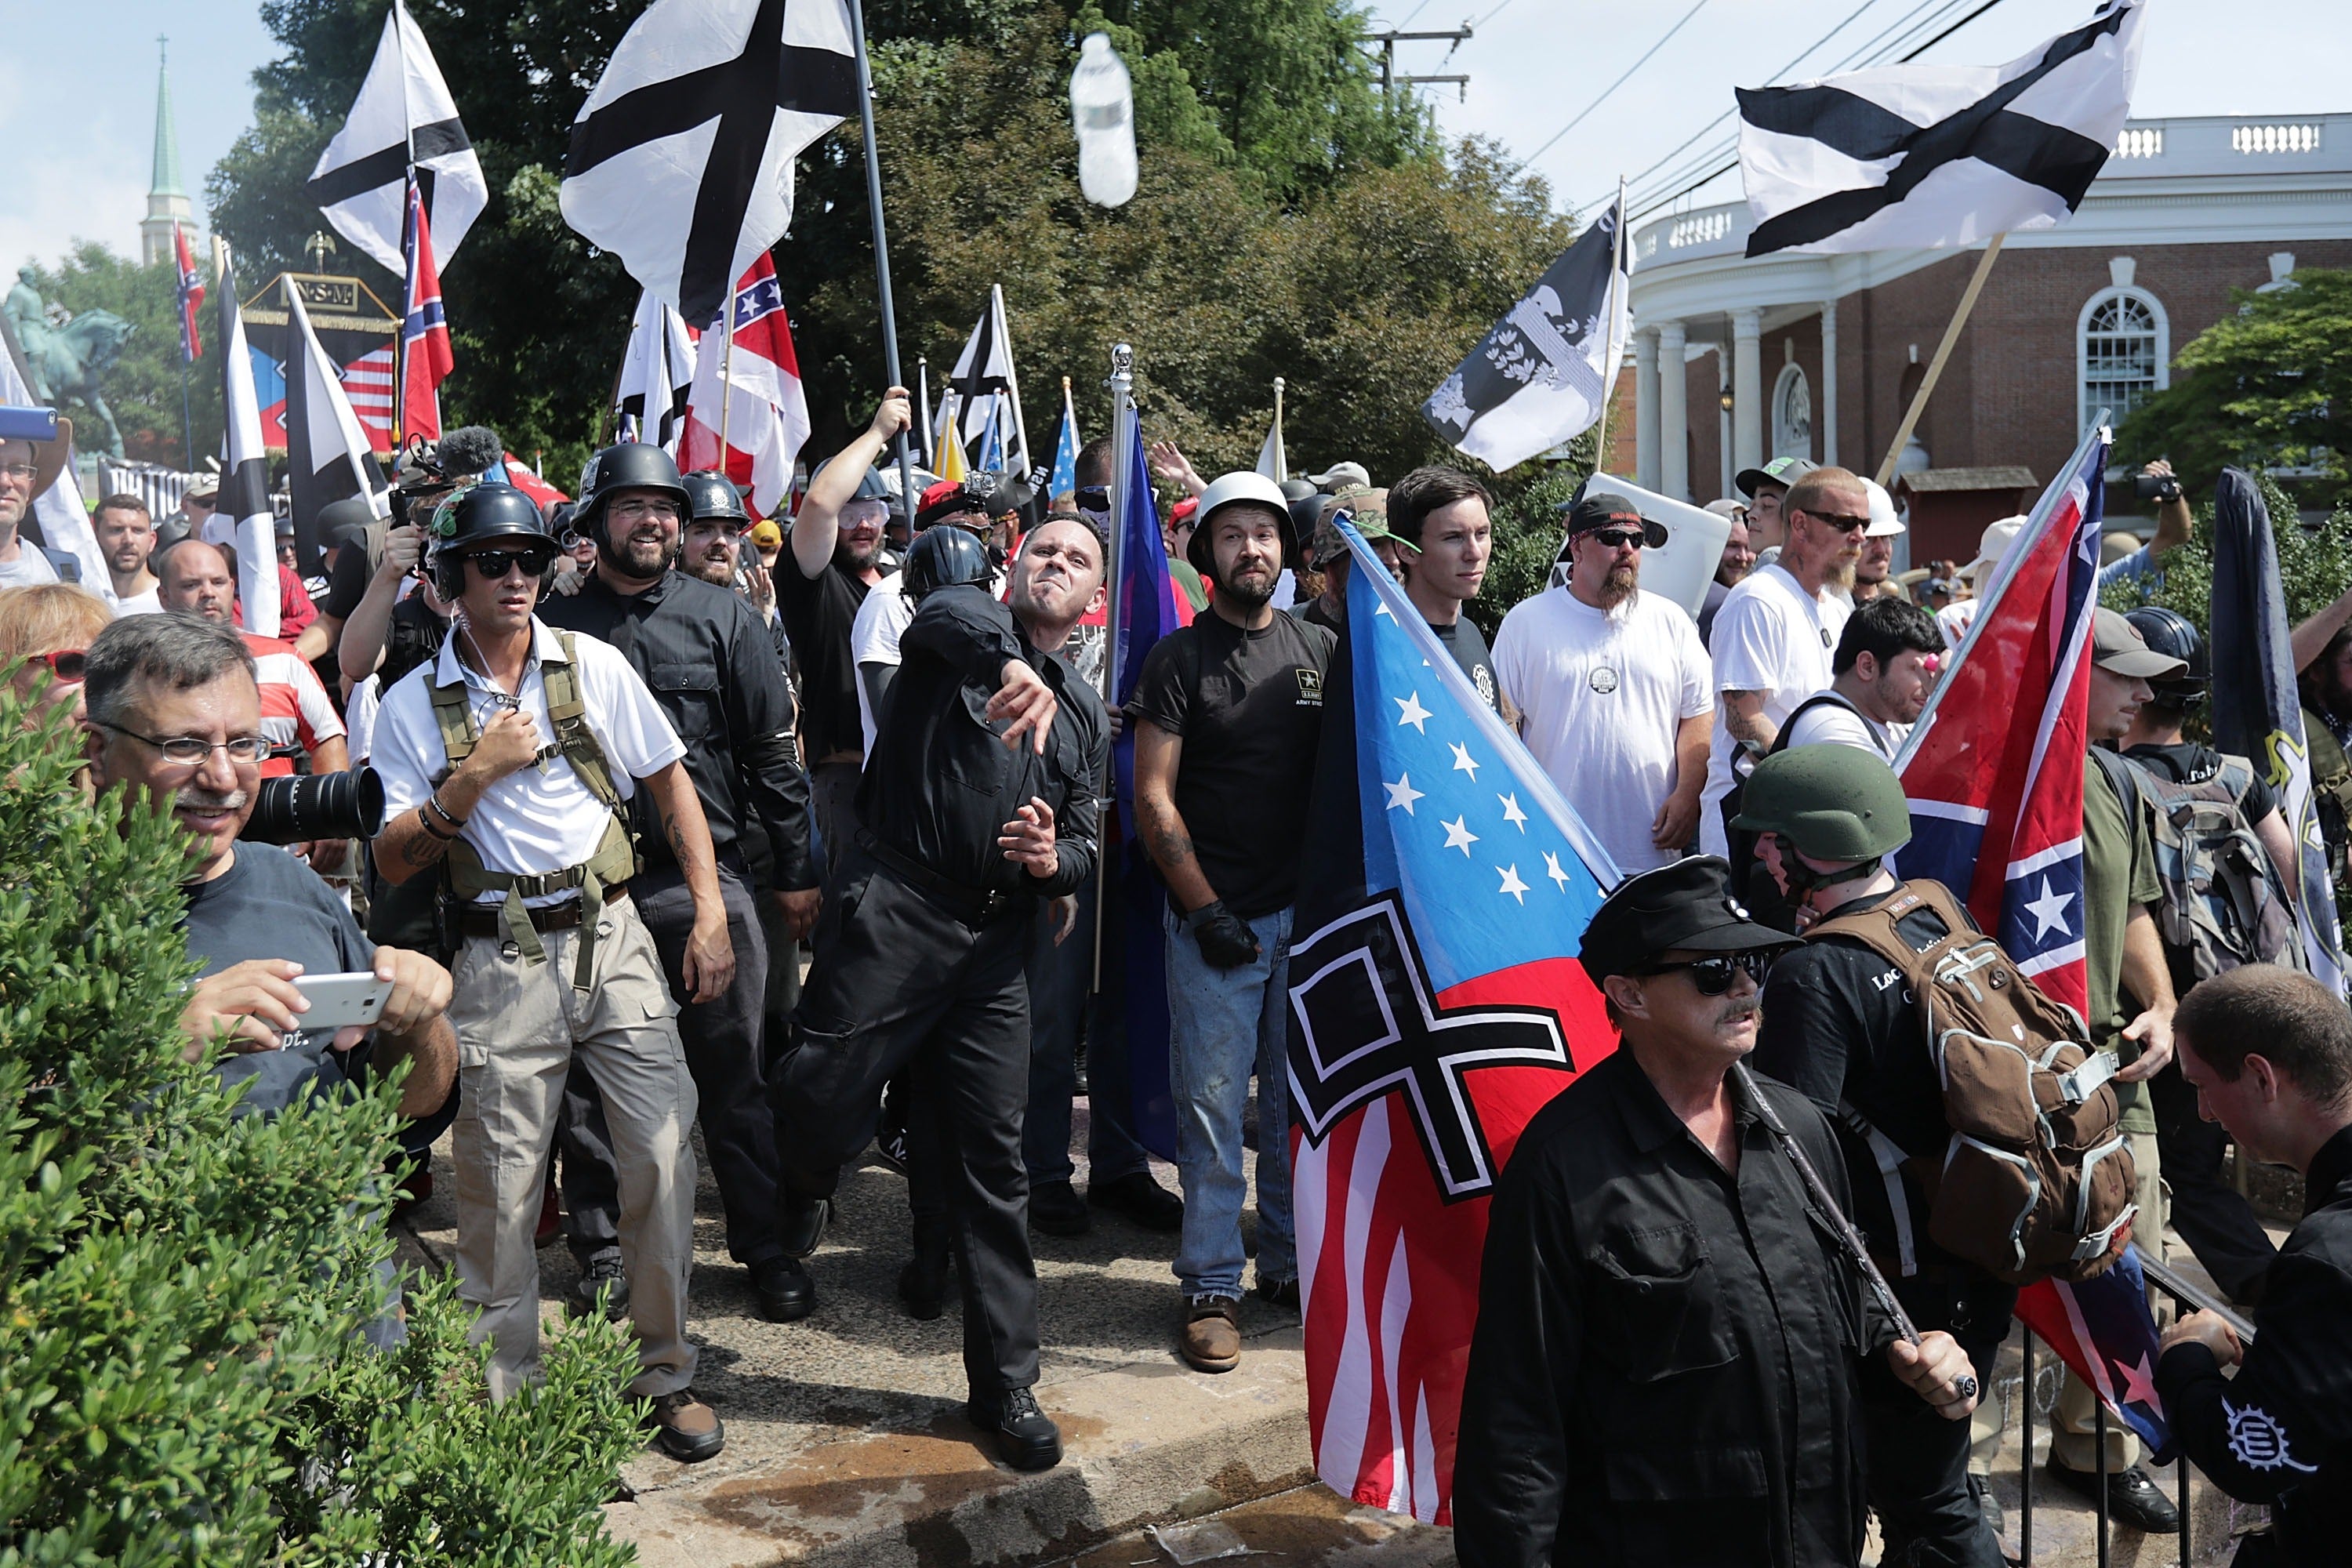 A white supremacist group is training for violence incase Donald Trump loses the election to Joe Biden.